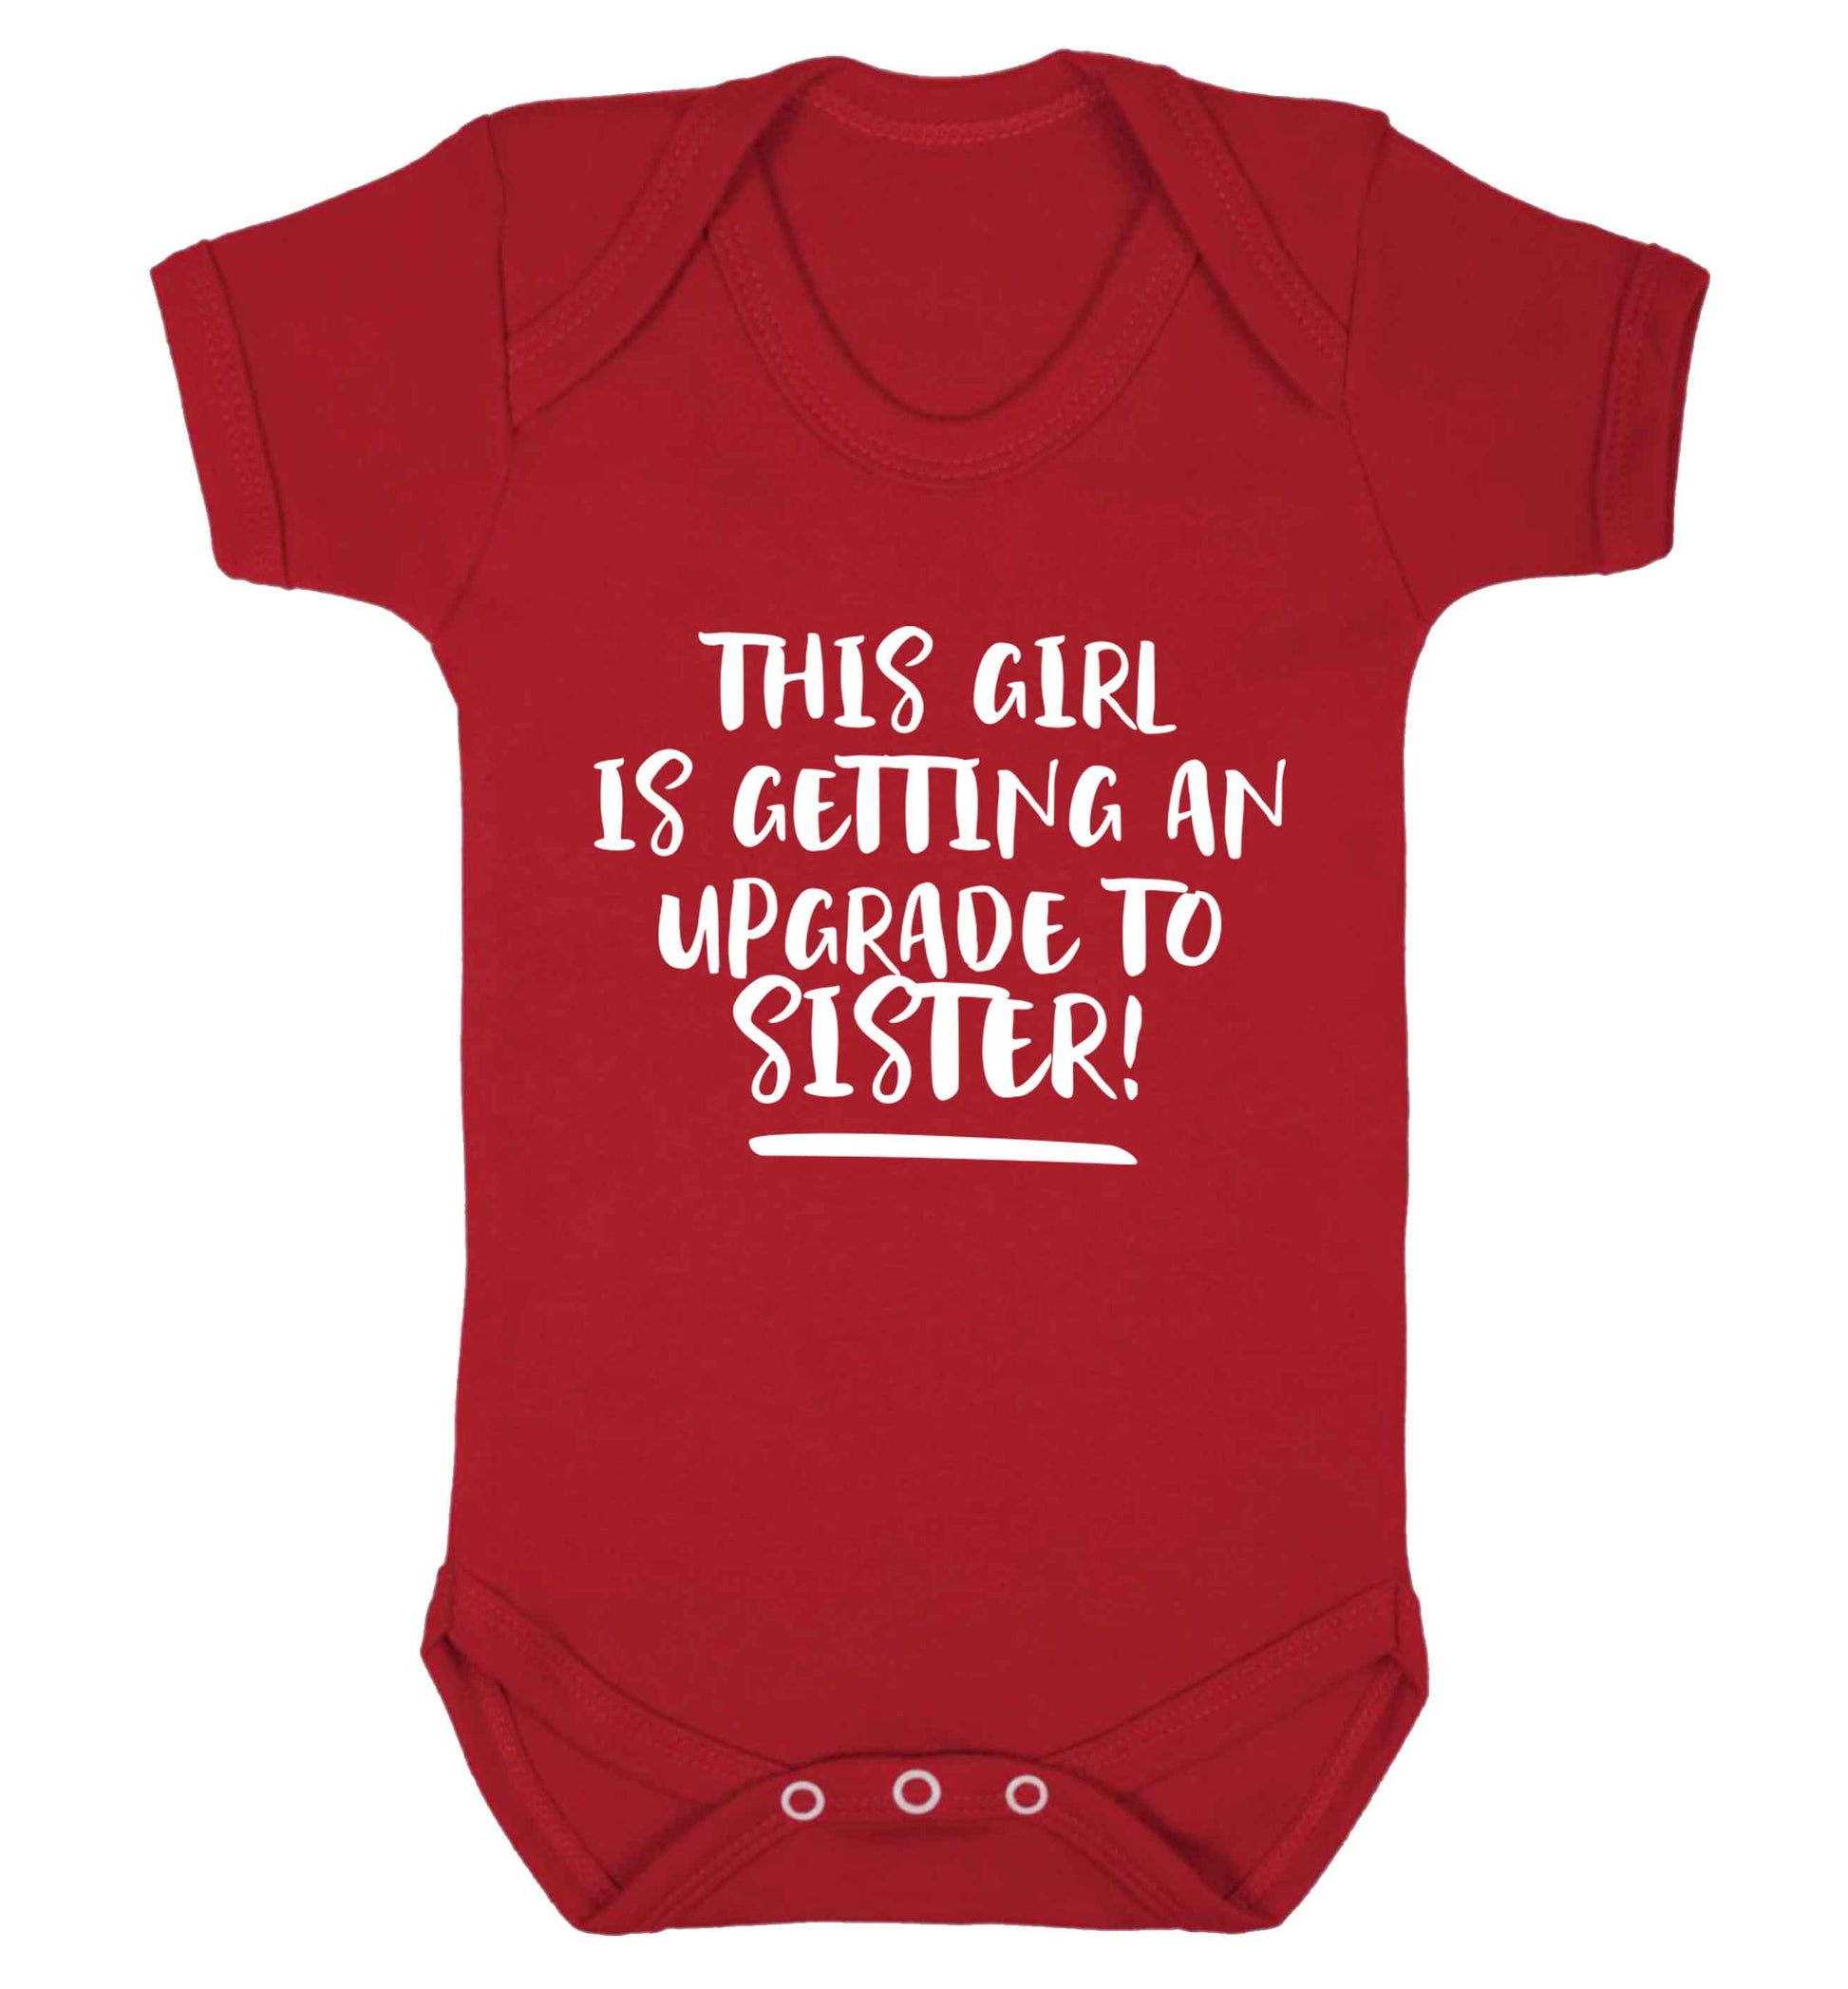 This girl is getting an upgrade to sister! Baby Vest red 18-24 months